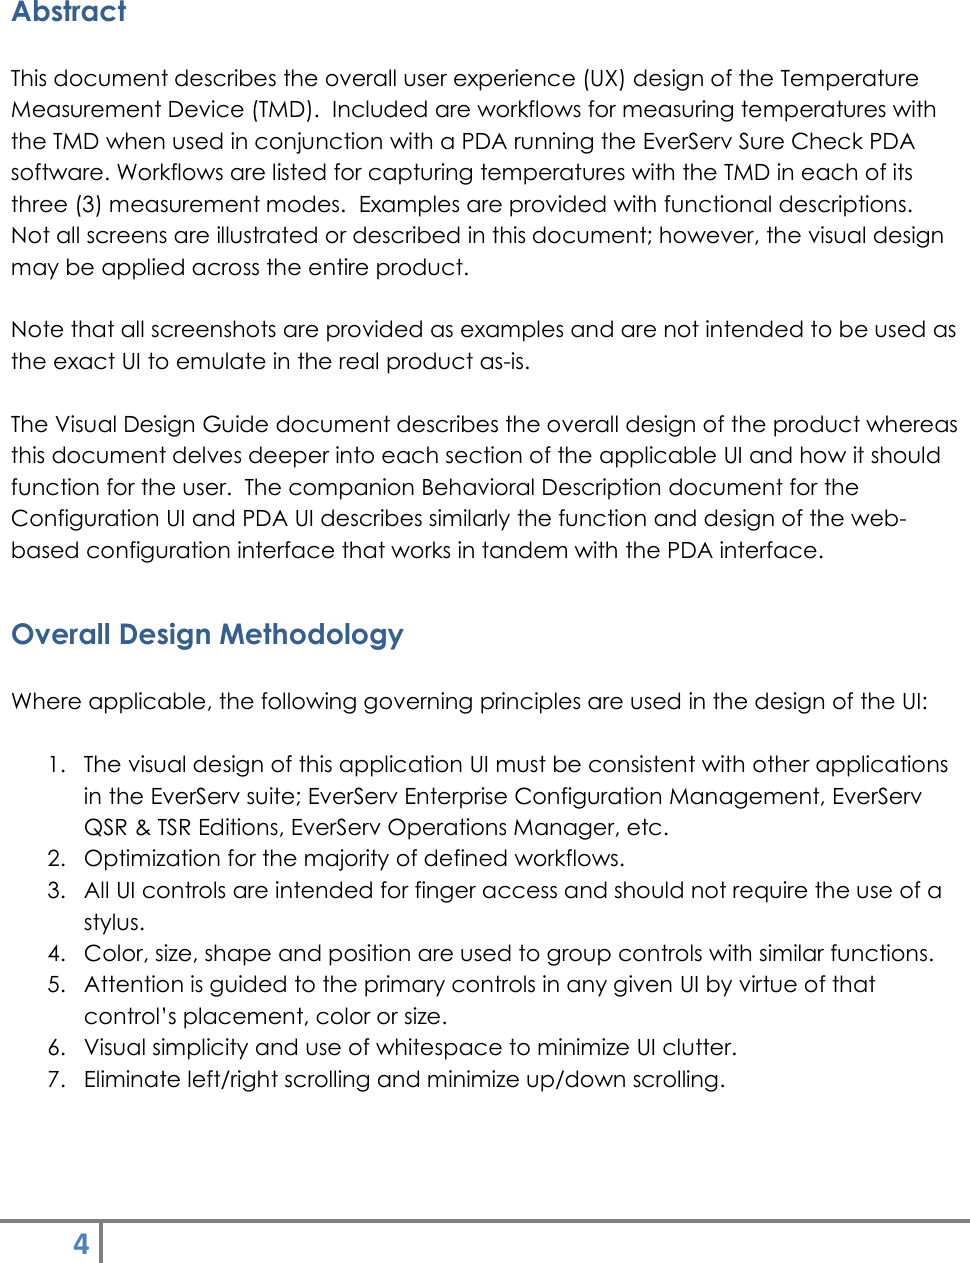 4    Abstract  This document describes the overall user experience (UX) design of the Temperature Measurement Device (TMD).  Included are workflows for measuring temperatures with the TMD when used in conjunction with a PDA running the EverServ Sure Check PDA software. Workflows are listed for capturing temperatures with the TMD in each of its three (3) measurement modes.  Examples are provided with functional descriptions.  Not all screens are illustrated or described in this document; however, the visual design may be applied across the entire product.  Note that all screenshots are provided as examples and are not intended to be used as the exact UI to emulate in the real product as-is.  The Visual Design Guide document describes the overall design of the product whereas this document delves deeper into each section of the applicable UI and how it should function for the user.  The companion Behavioral Description document for the Configuration UI and PDA UI describes similarly the function and design of the web-based configuration interface that works in tandem with the PDA interface. Overall Design Methodology  Where applicable, the following governing principles are used in the design of the UI:  1. The visual design of this application UI must be consistent with other applications in the EverServ suite; EverServ Enterprise Configuration Management, EverServ QSR &amp; TSR Editions, EverServ Operations Manager, etc. 2. Optimization for the majority of defined workflows. 3. All UI controls are intended for finger access and should not require the use of a stylus. 4. Color, size, shape and position are used to group controls with similar functions.  5. Attention is guided to the primary controls in any given UI by virtue of that control’s placement, color or size. 6. Visual simplicity and use of whitespace to minimize UI clutter. 7. Eliminate left/right scrolling and minimize up/down scrolling.  